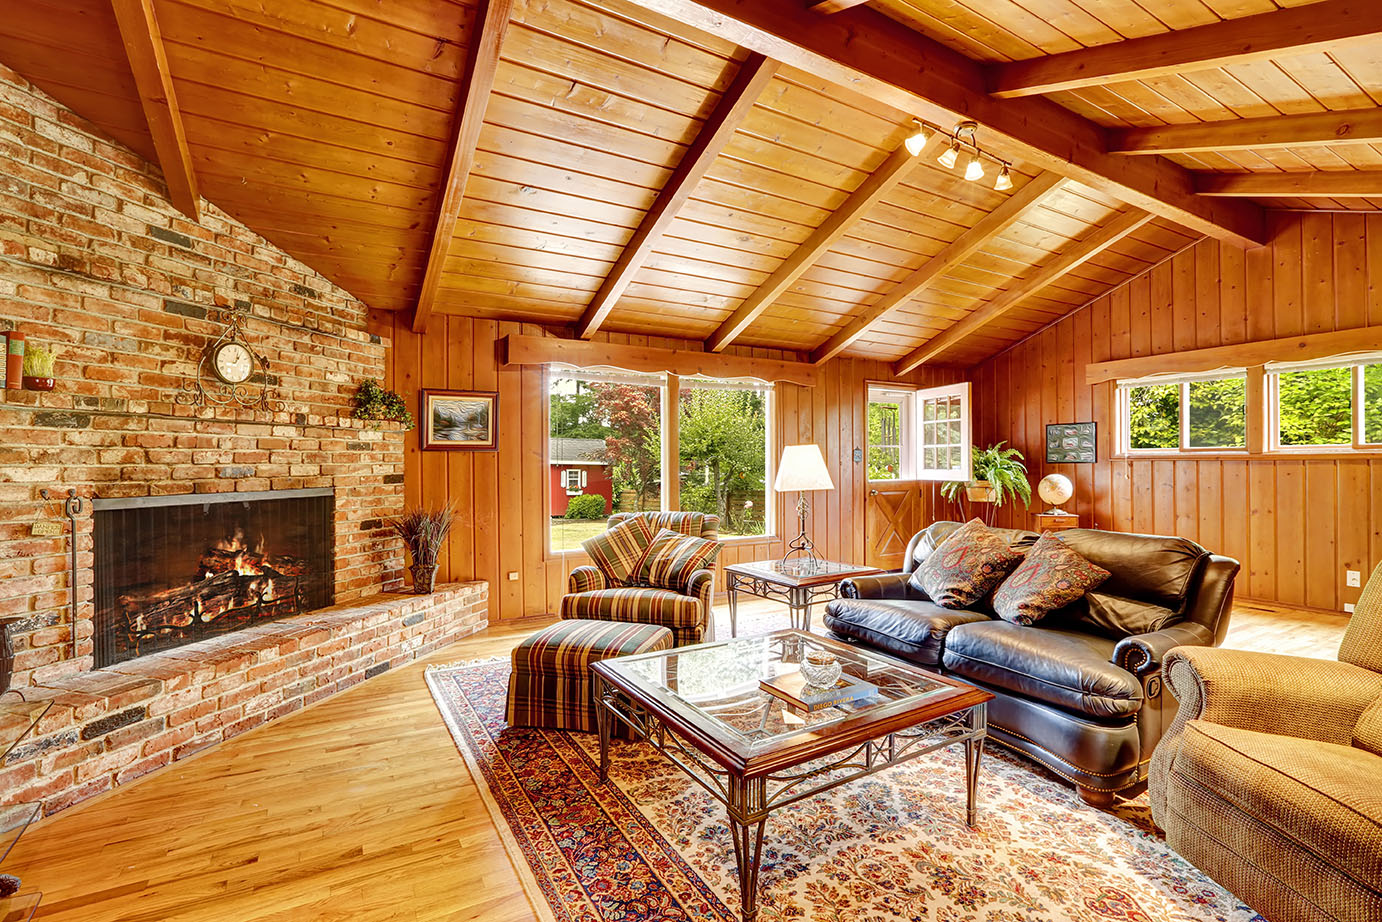 How To Choose Furniture For A Log Home